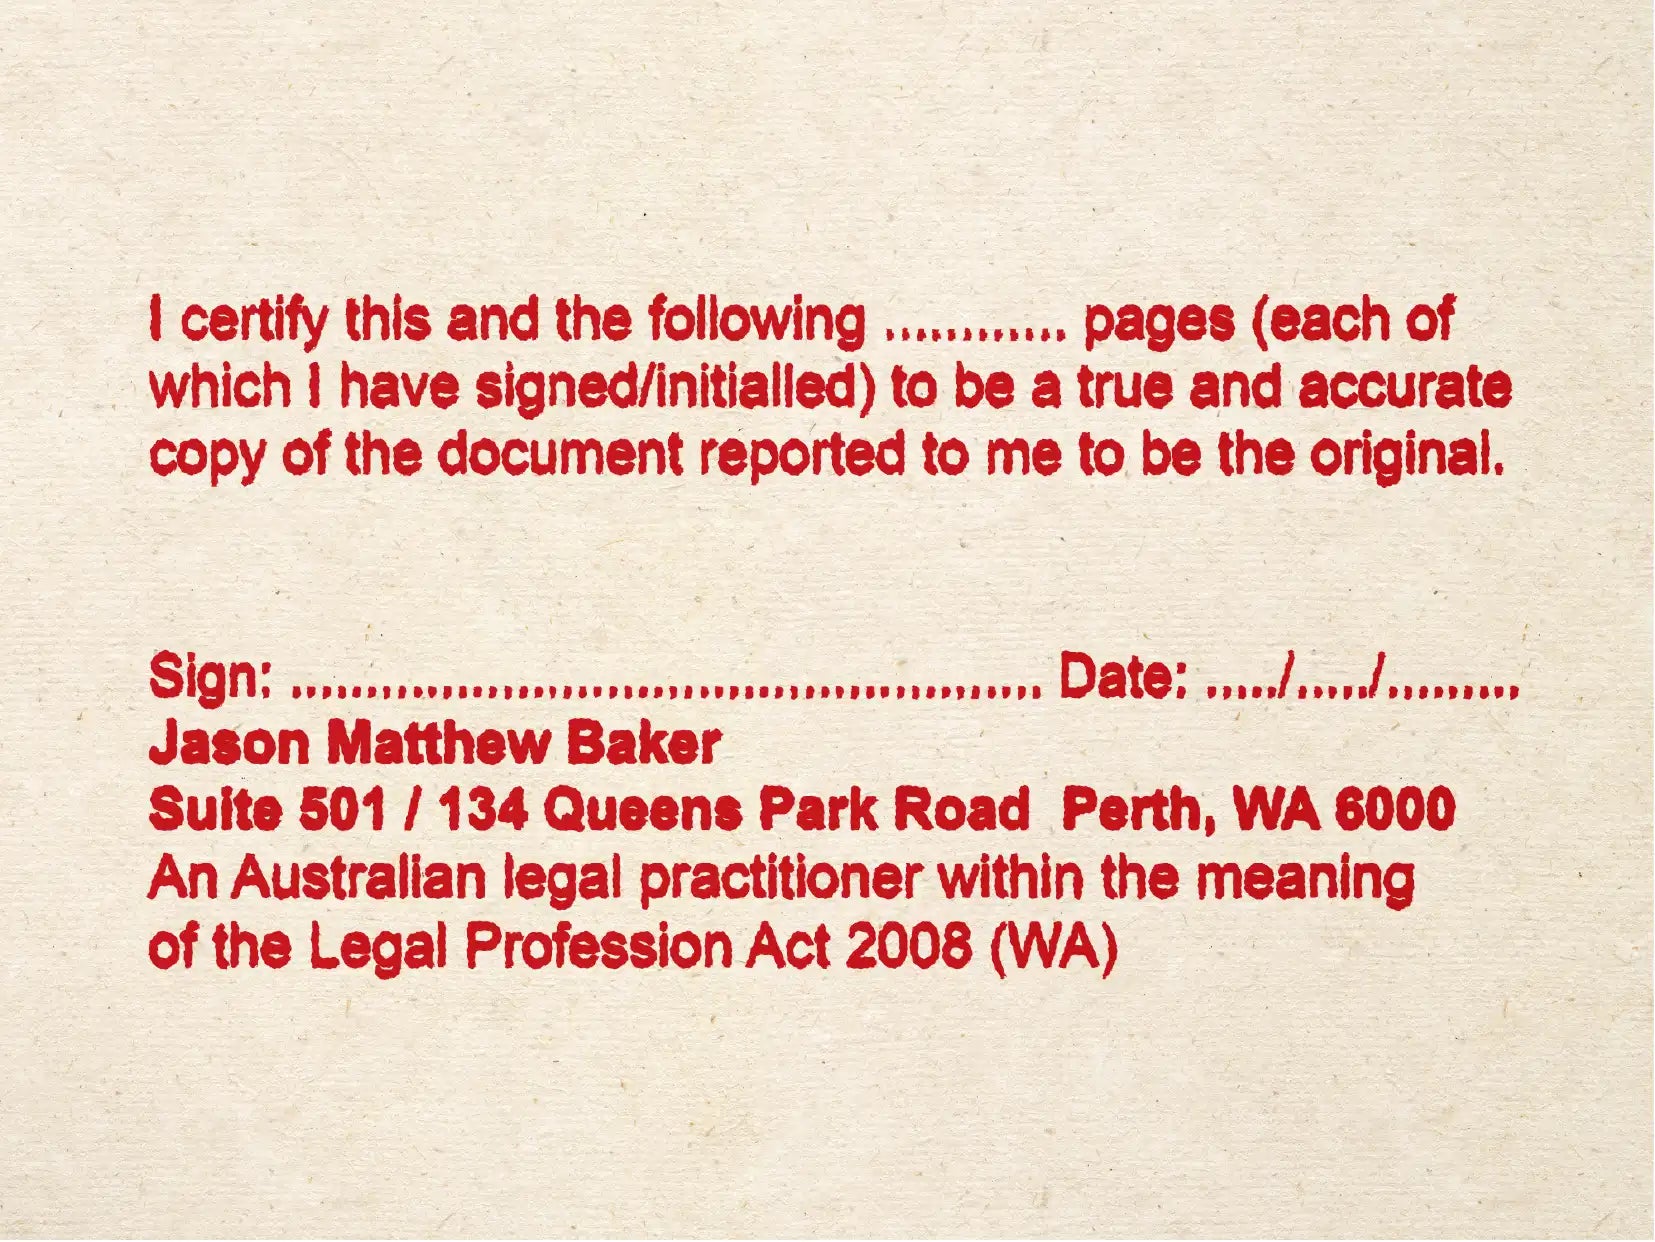 Certify multi-page documents with our Red WA legal practitioner stamp